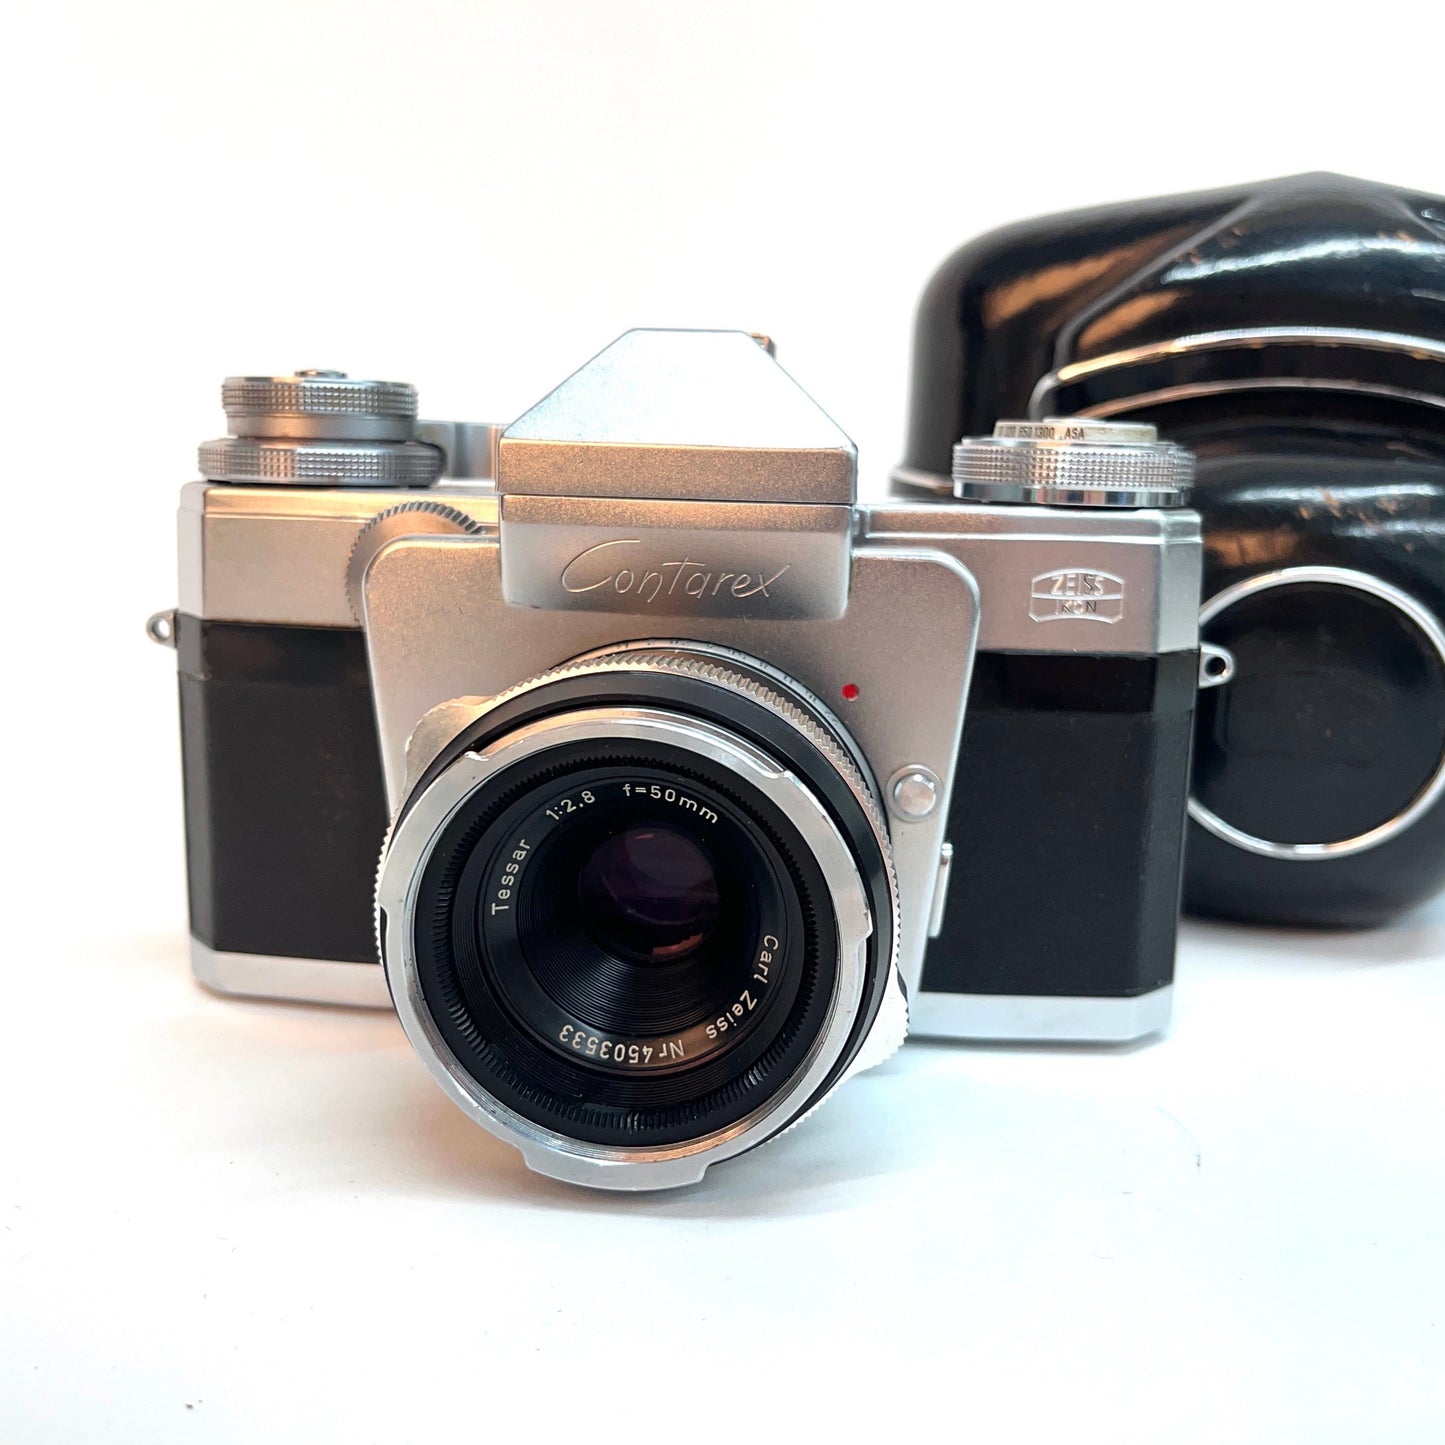 Zeiss Ikon Contarex Special SLR 35mm Film Camera with 50mm f/2.8 Tessar Lens and Case RARE